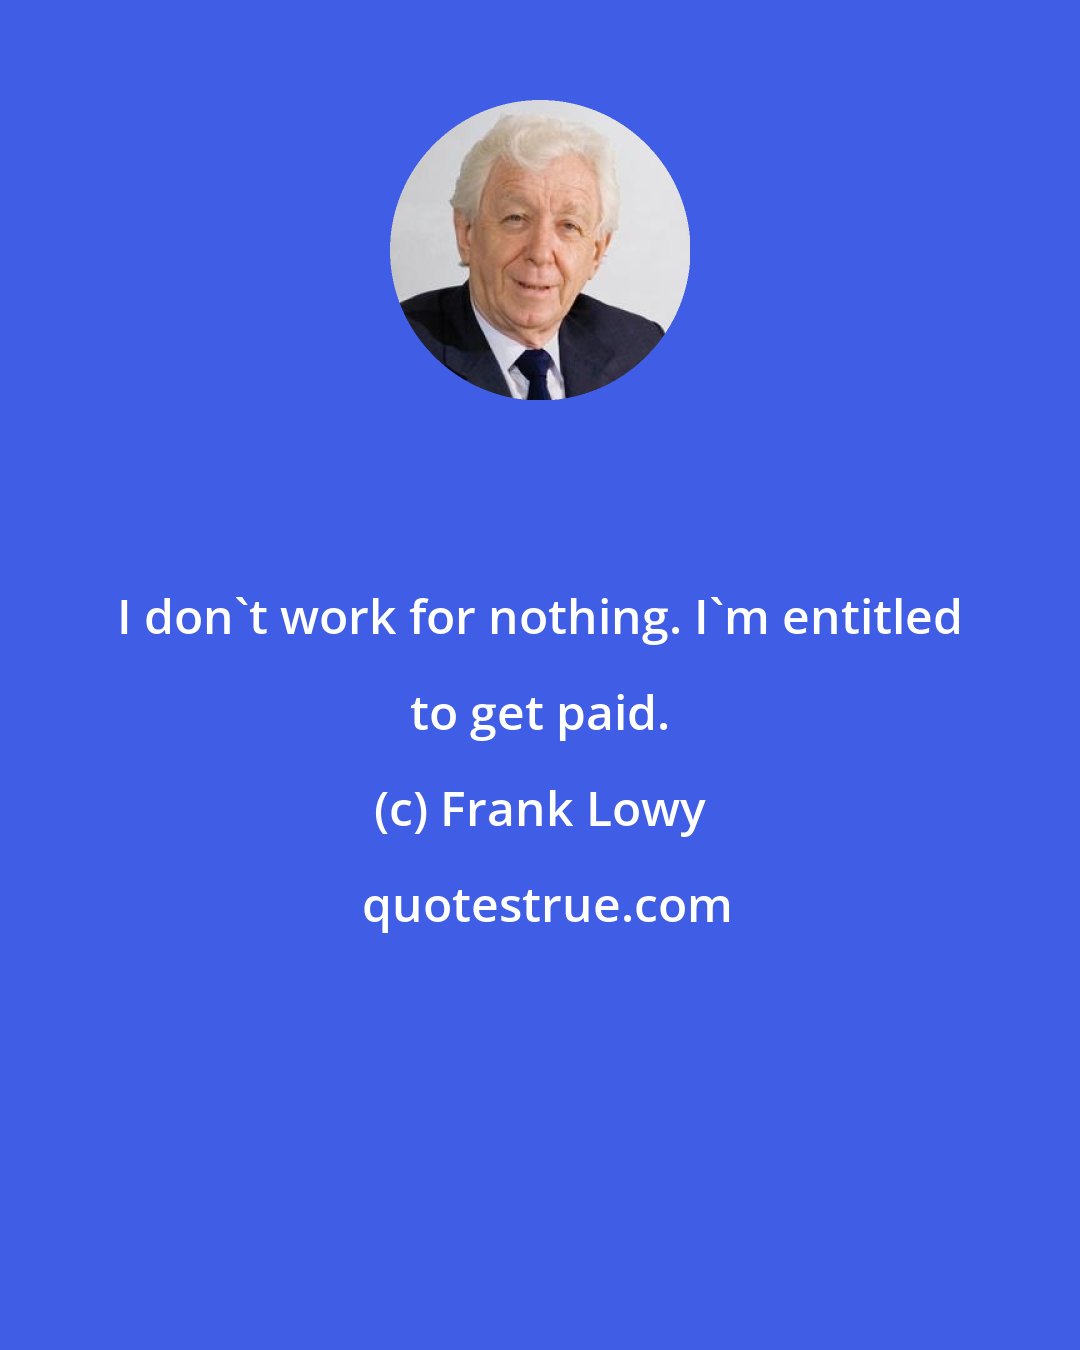 Frank Lowy: I don't work for nothing. I'm entitled to get paid.